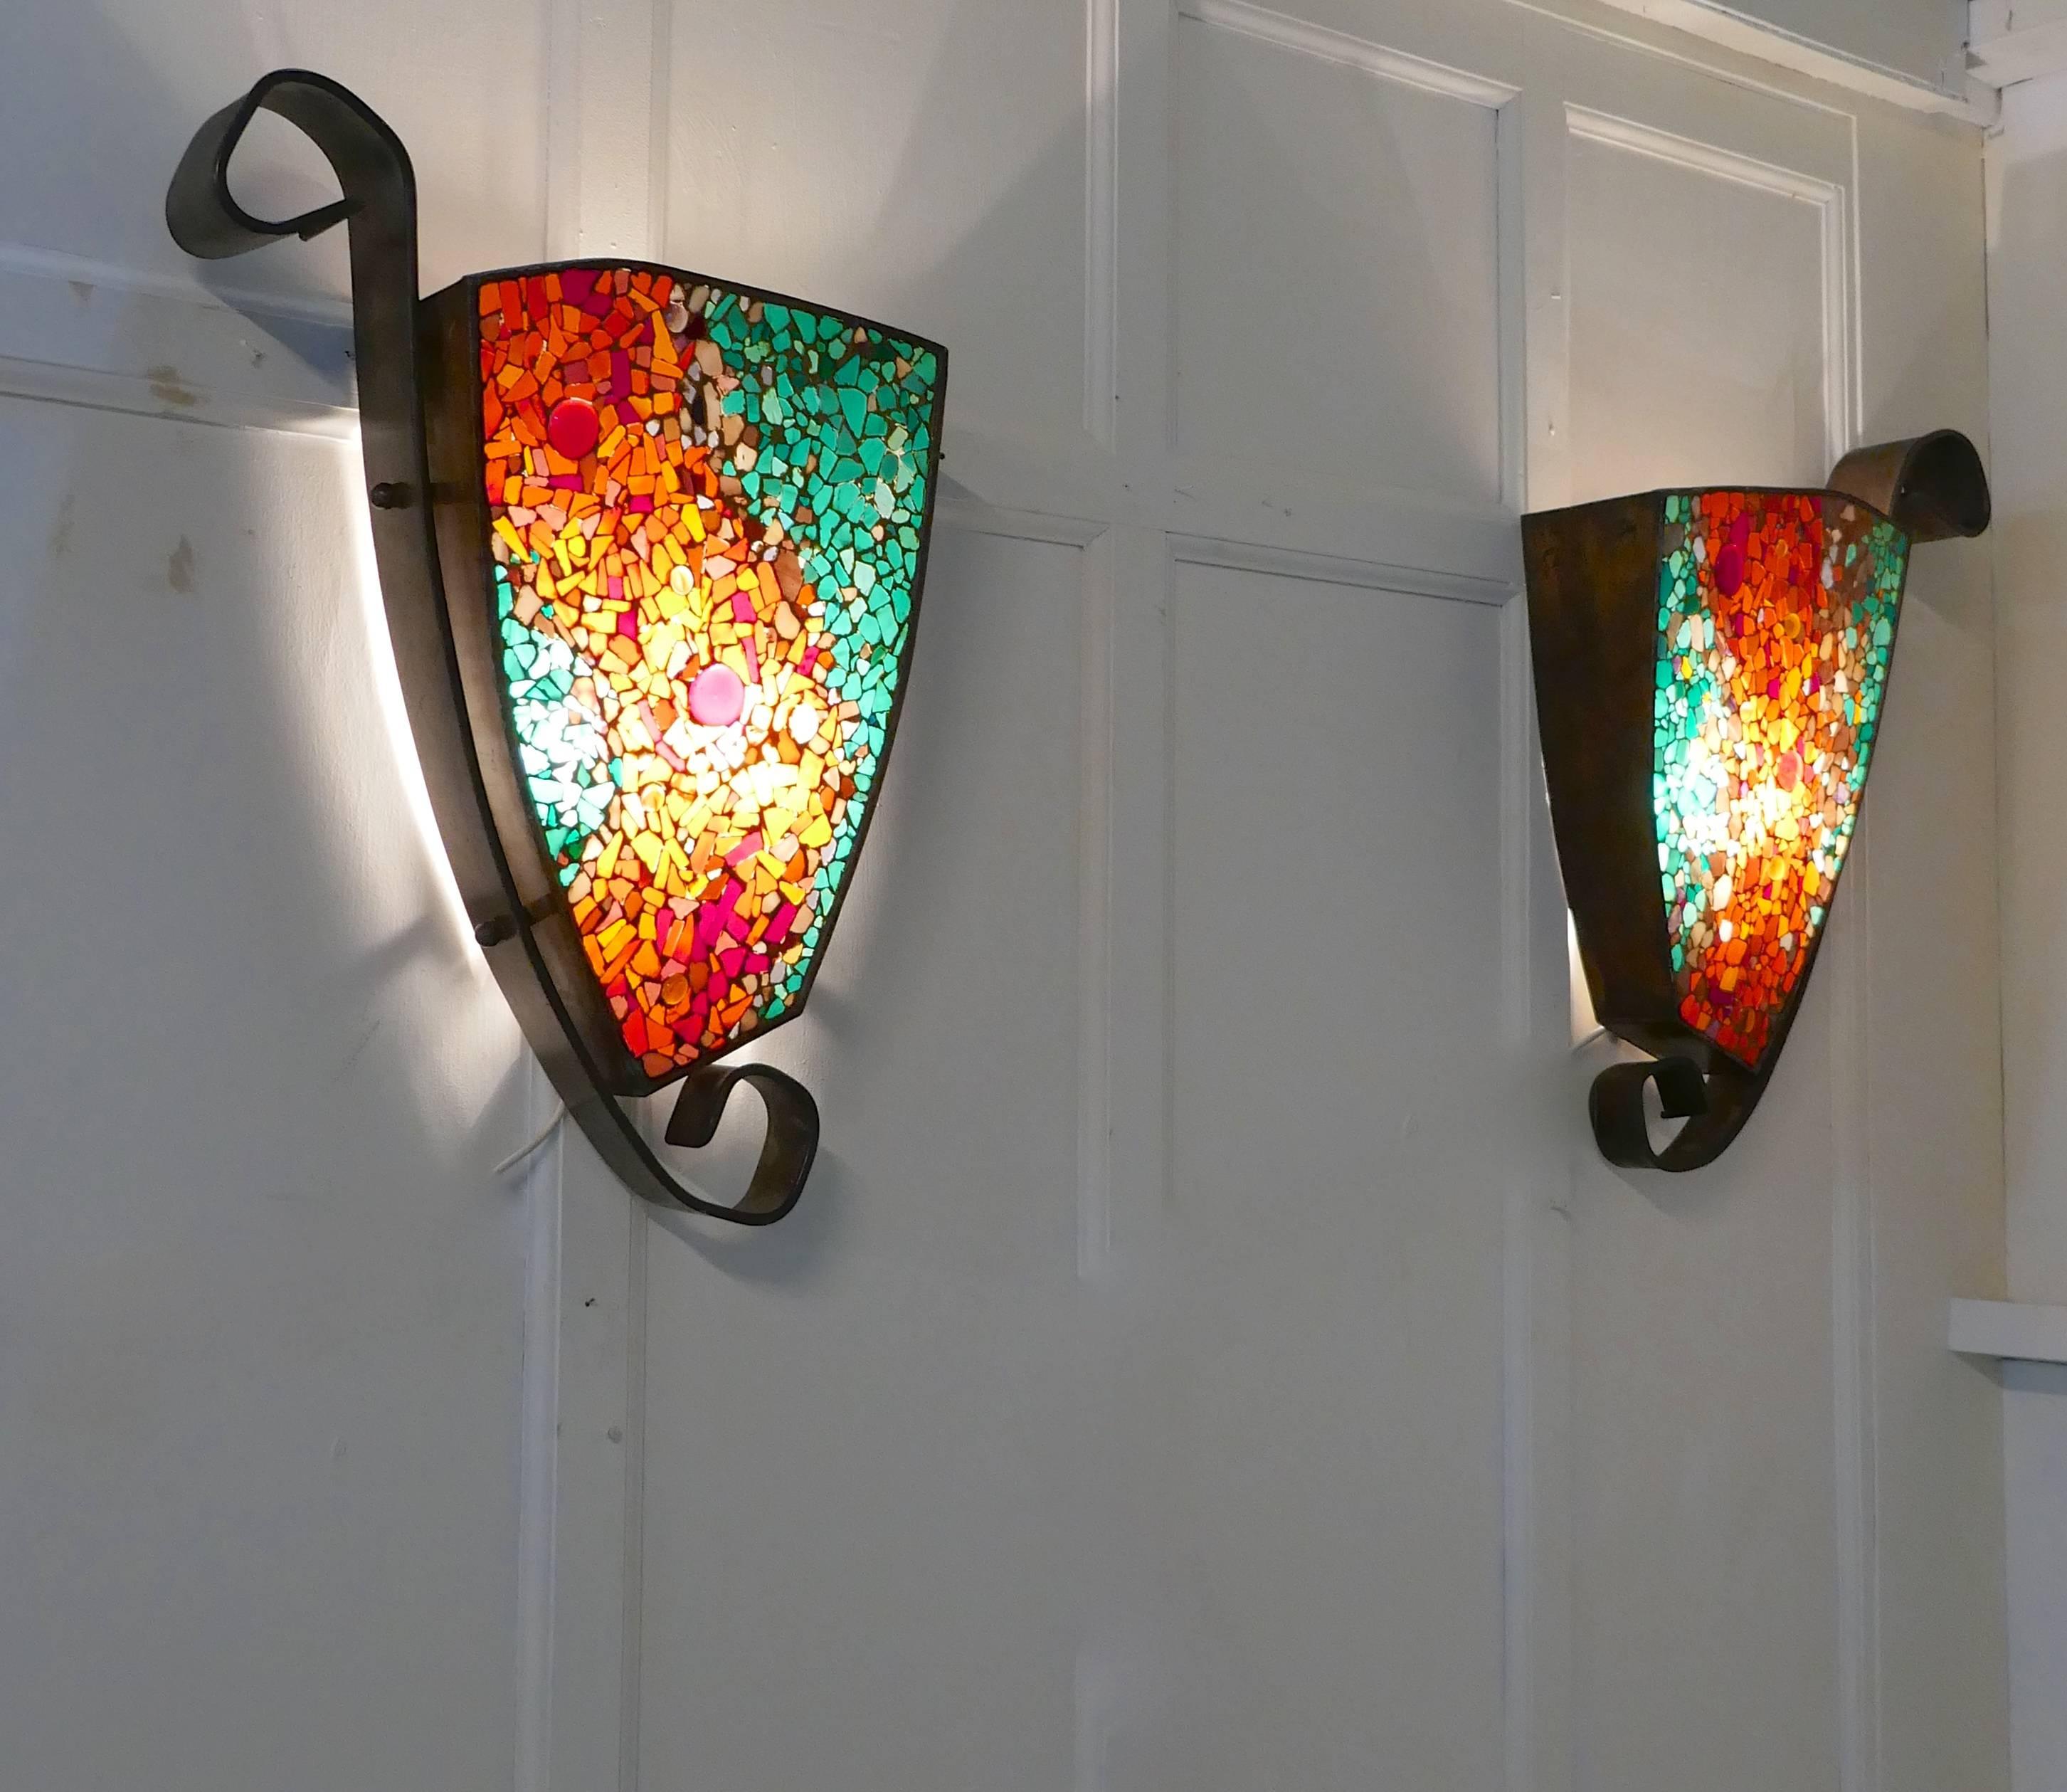 Set of four extra large Gothic Art Deco glass and copper wall lights

These are very large stylish lamps, they are almost 30” tall, the shades come from North Africa and are made from mosaic glass
The glass mosaic has a contemporary flowing